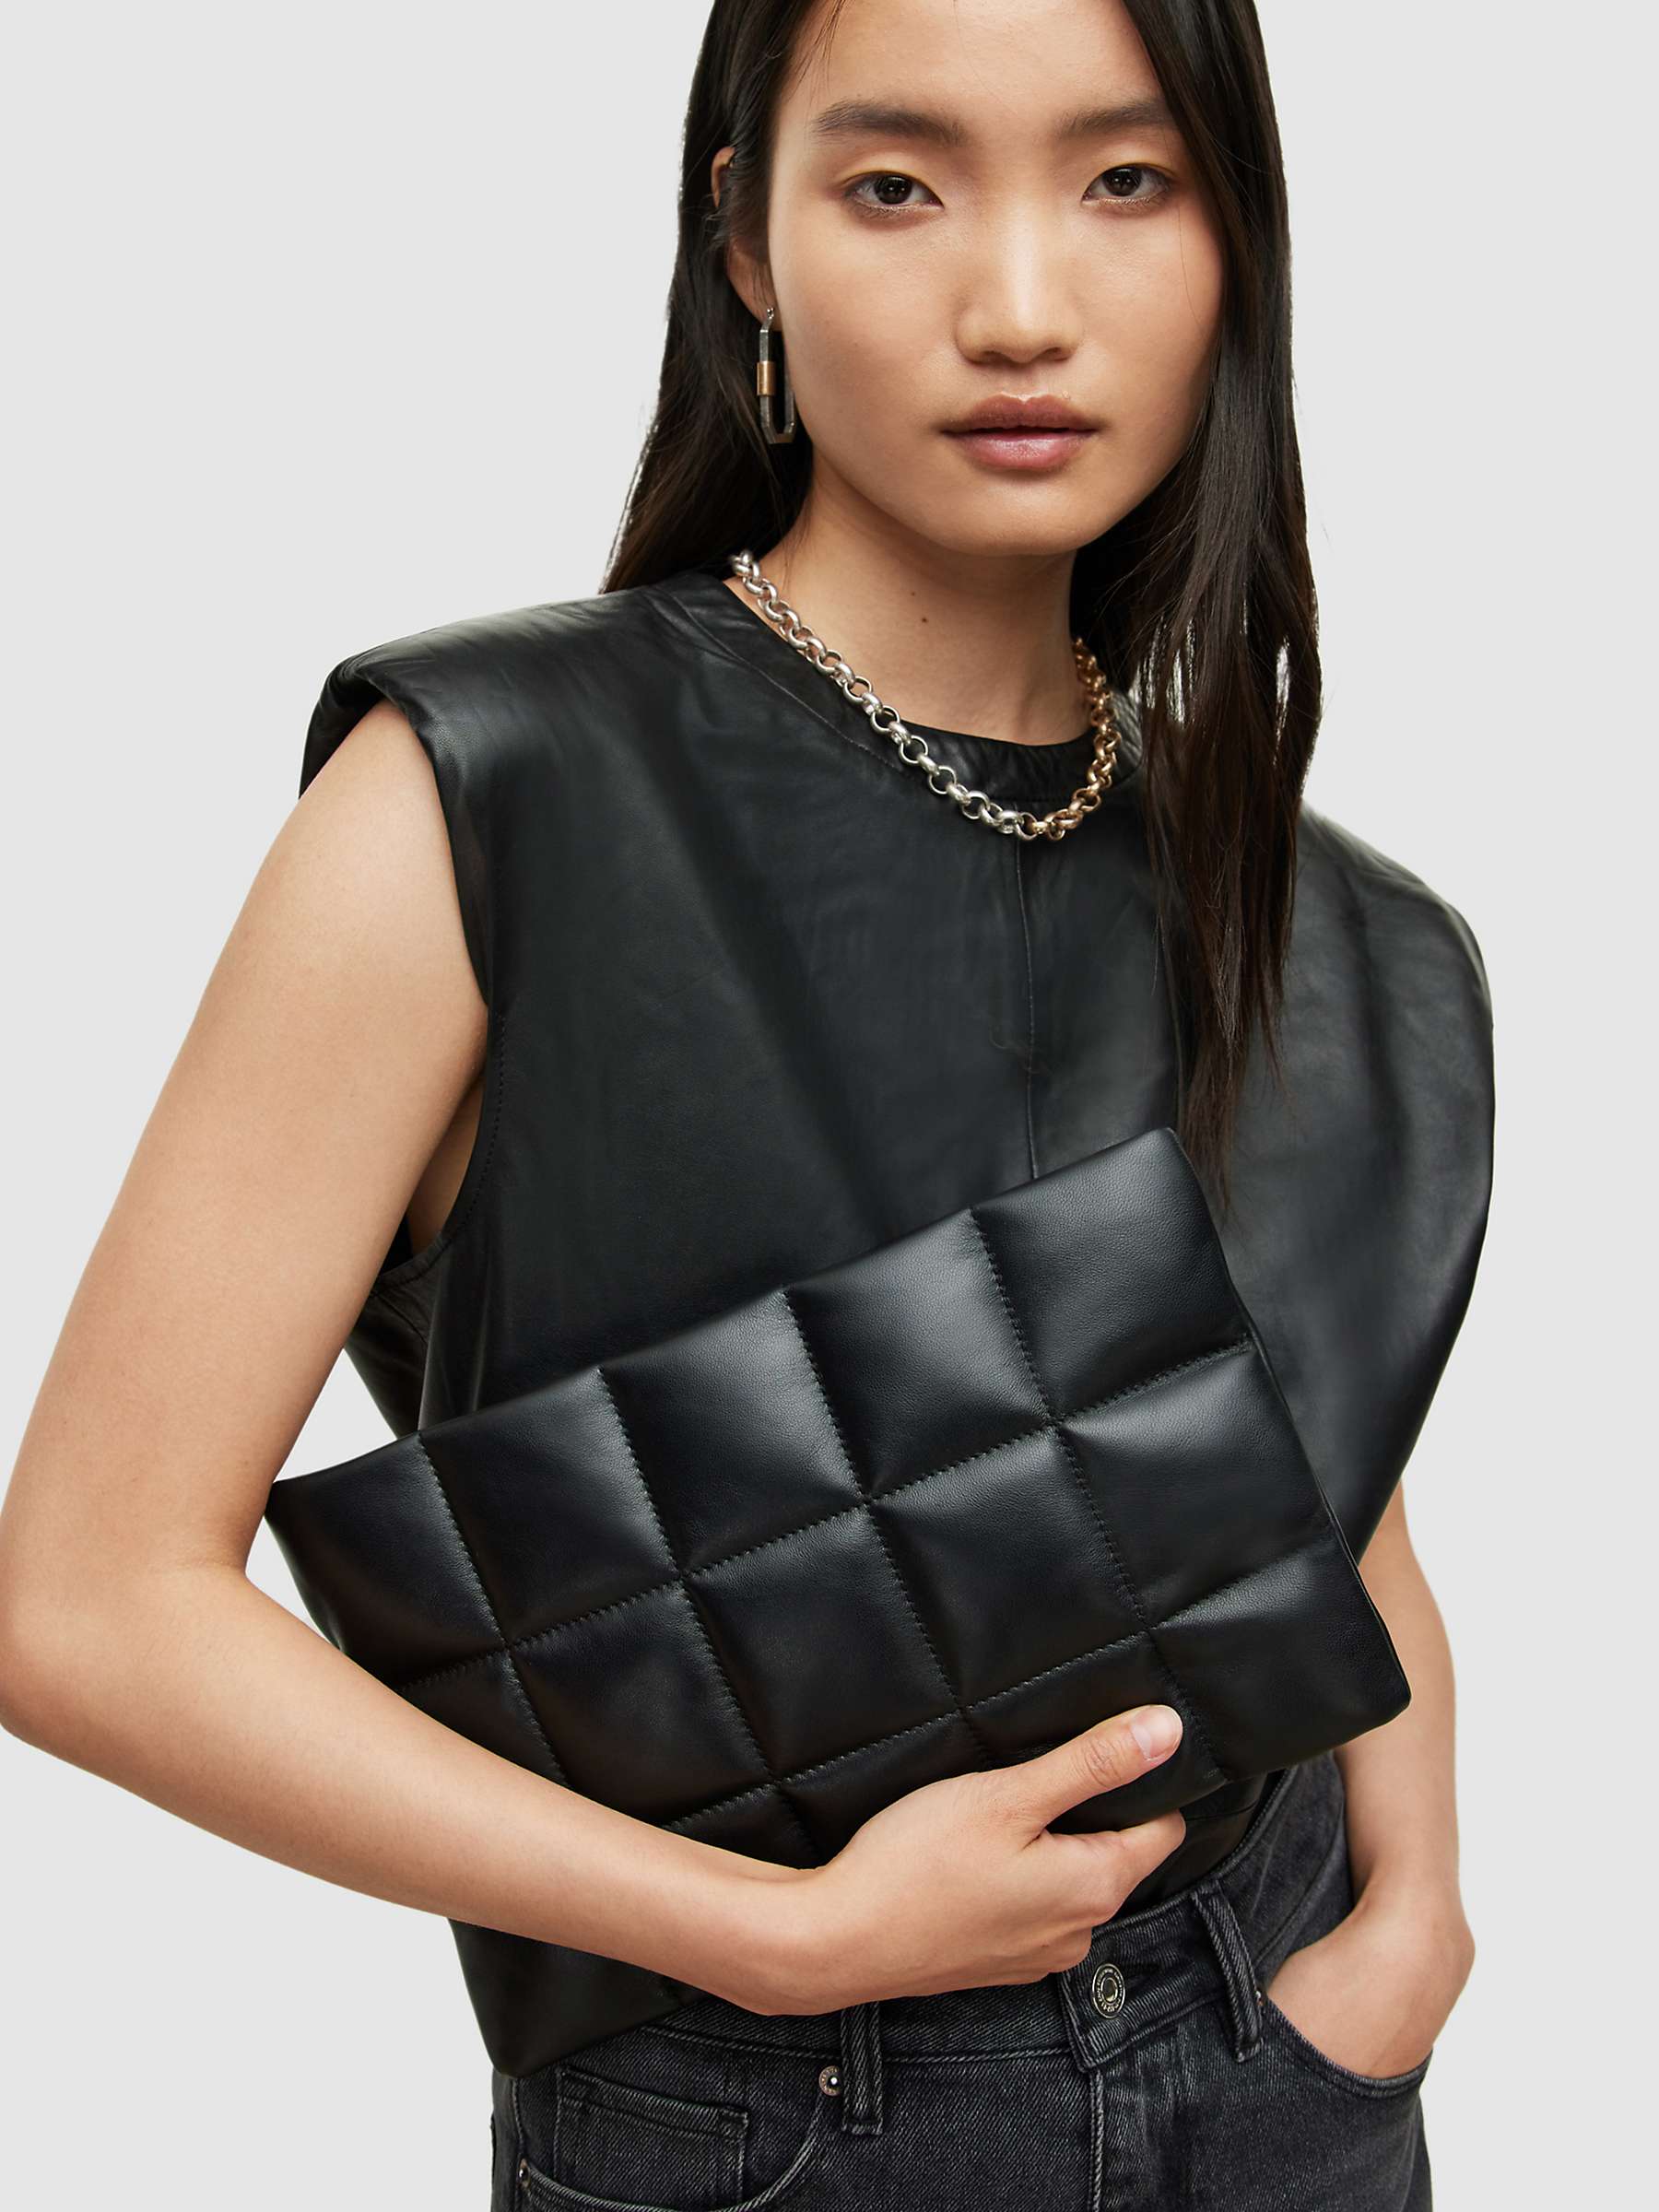 Buy AllSaints Bettina Quilted Leather Clutch Bag, Black Online at johnlewis.com